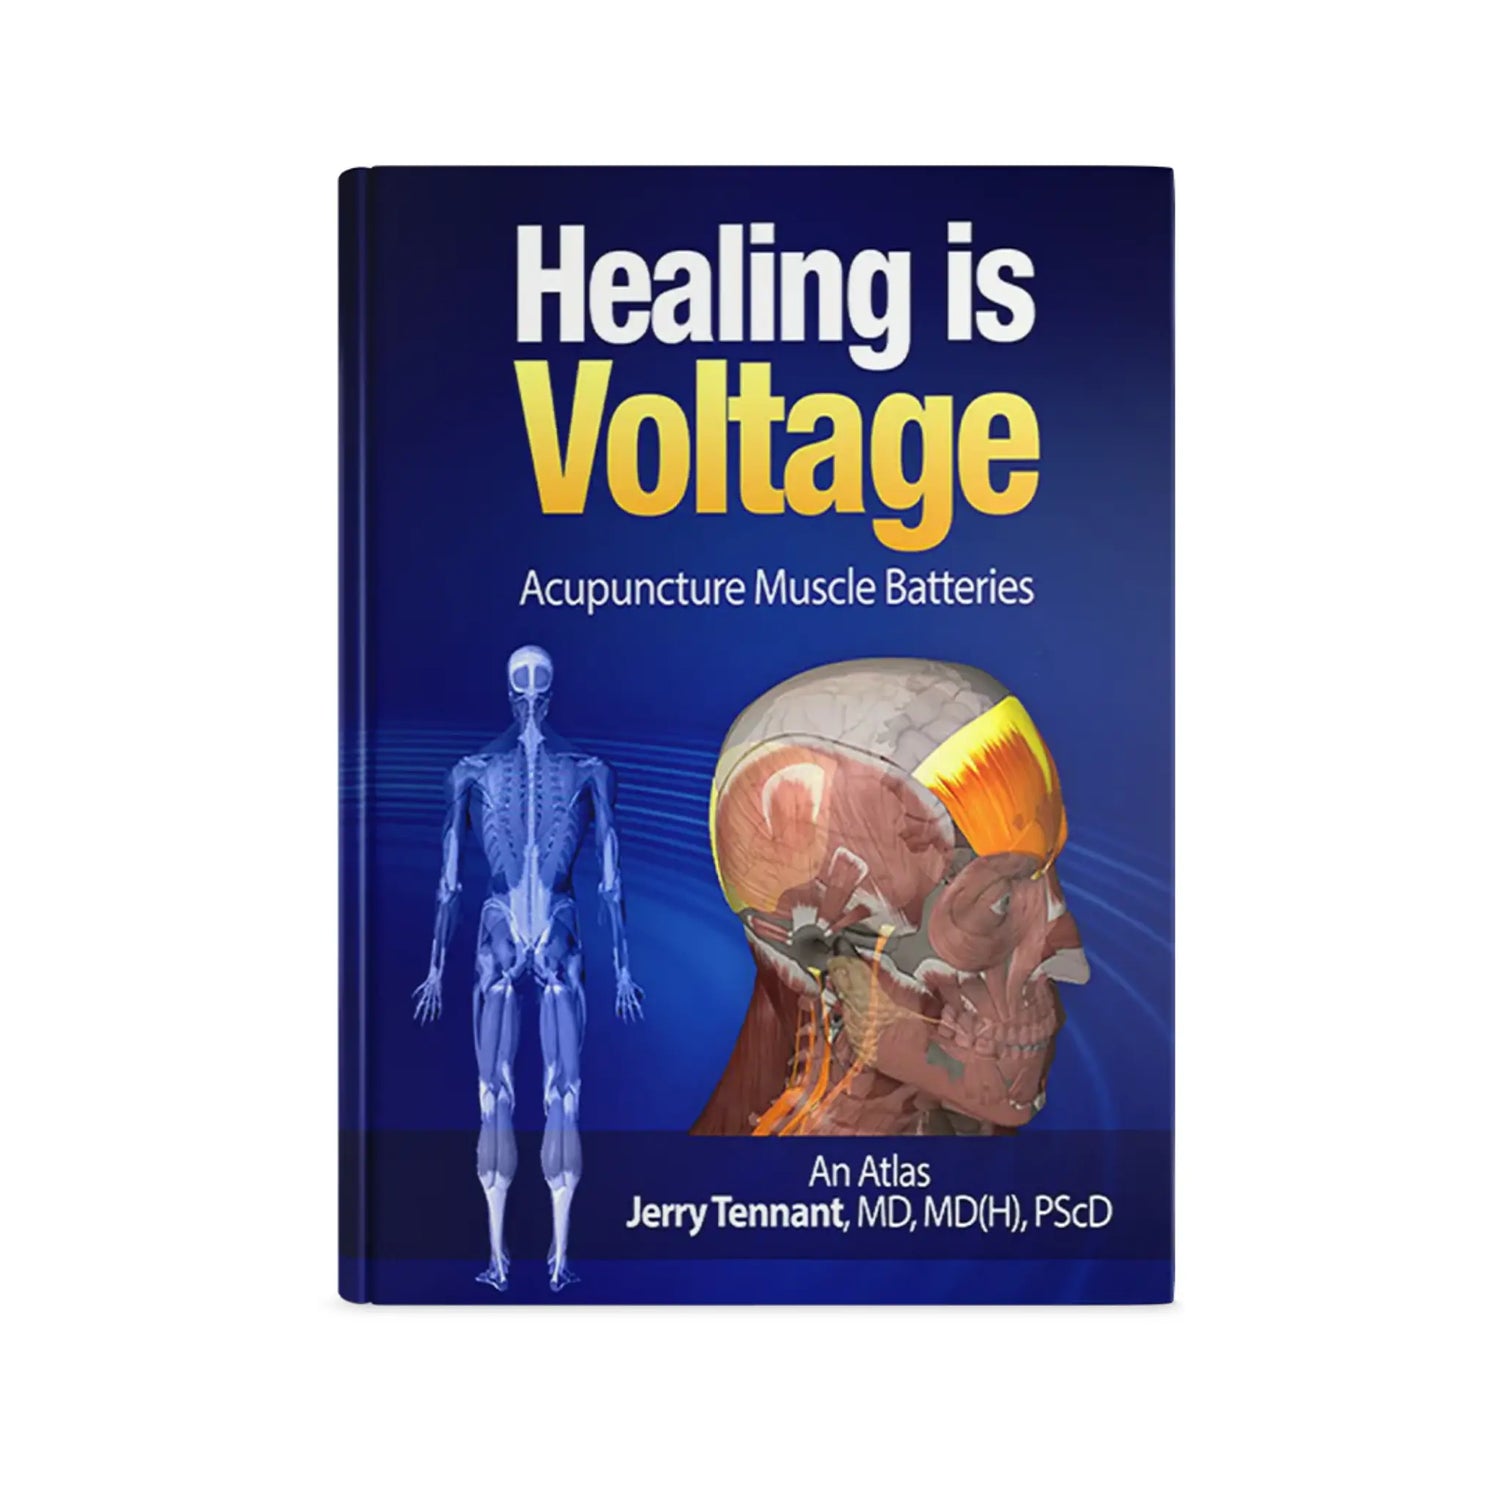 Healing is Voltage™ - Acupuncture Muscle Batteries: An Atlas